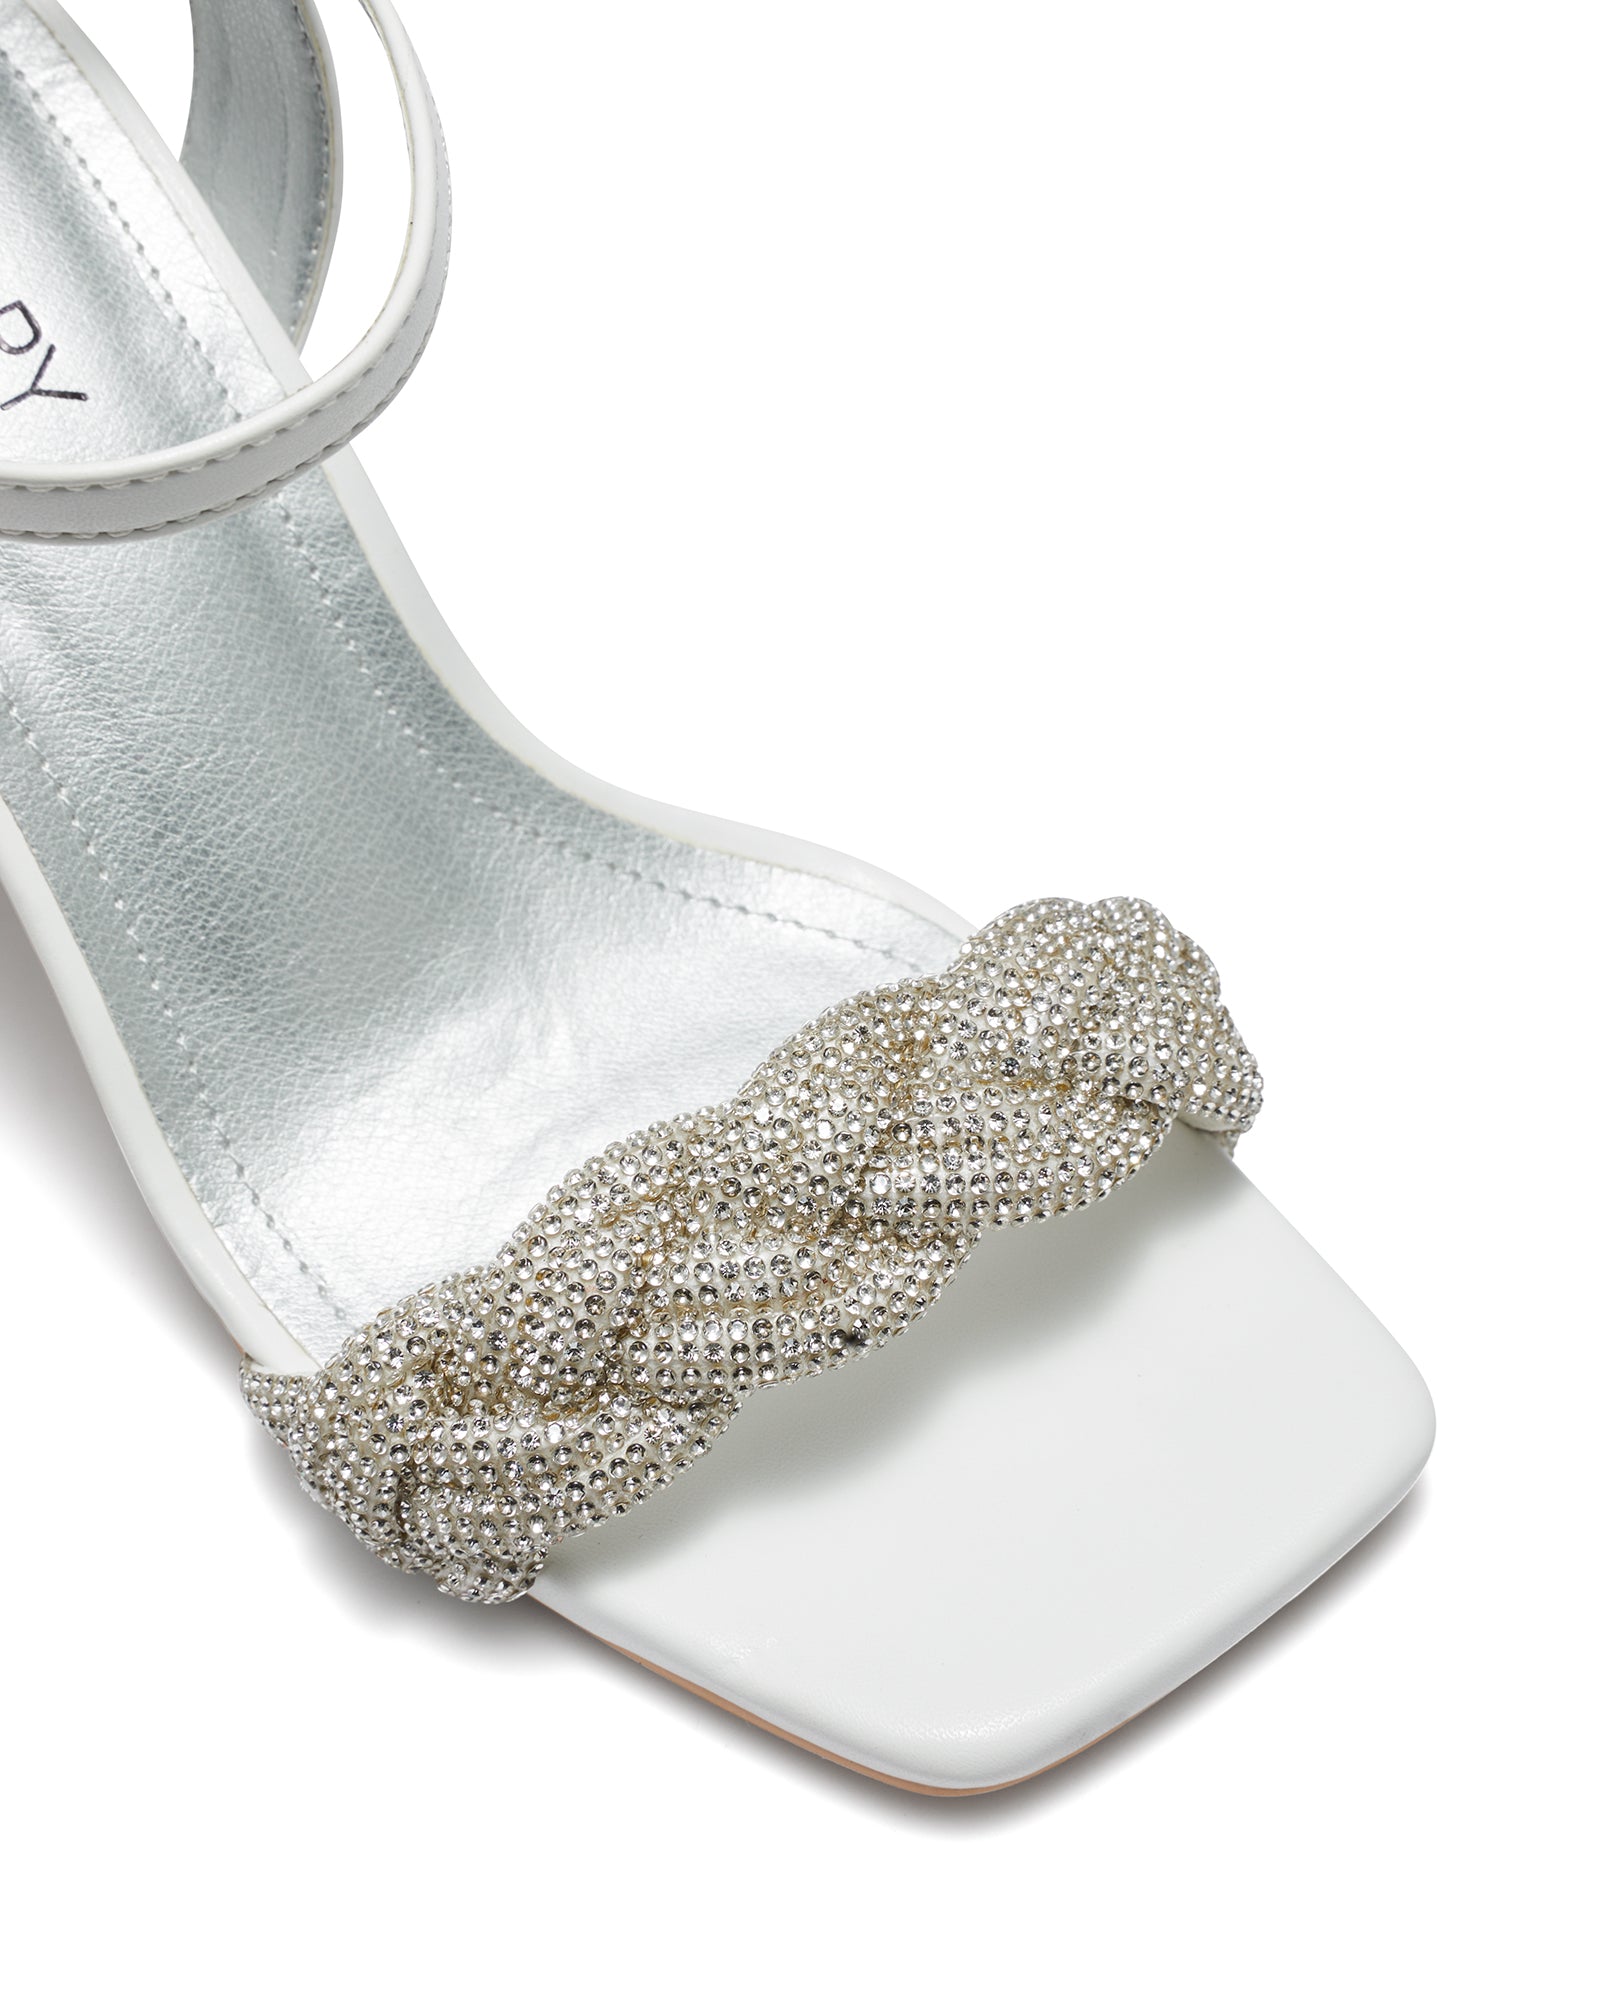 Therapy Shoes Allure White | Women's Heels | Sandals | Diamante | Braid